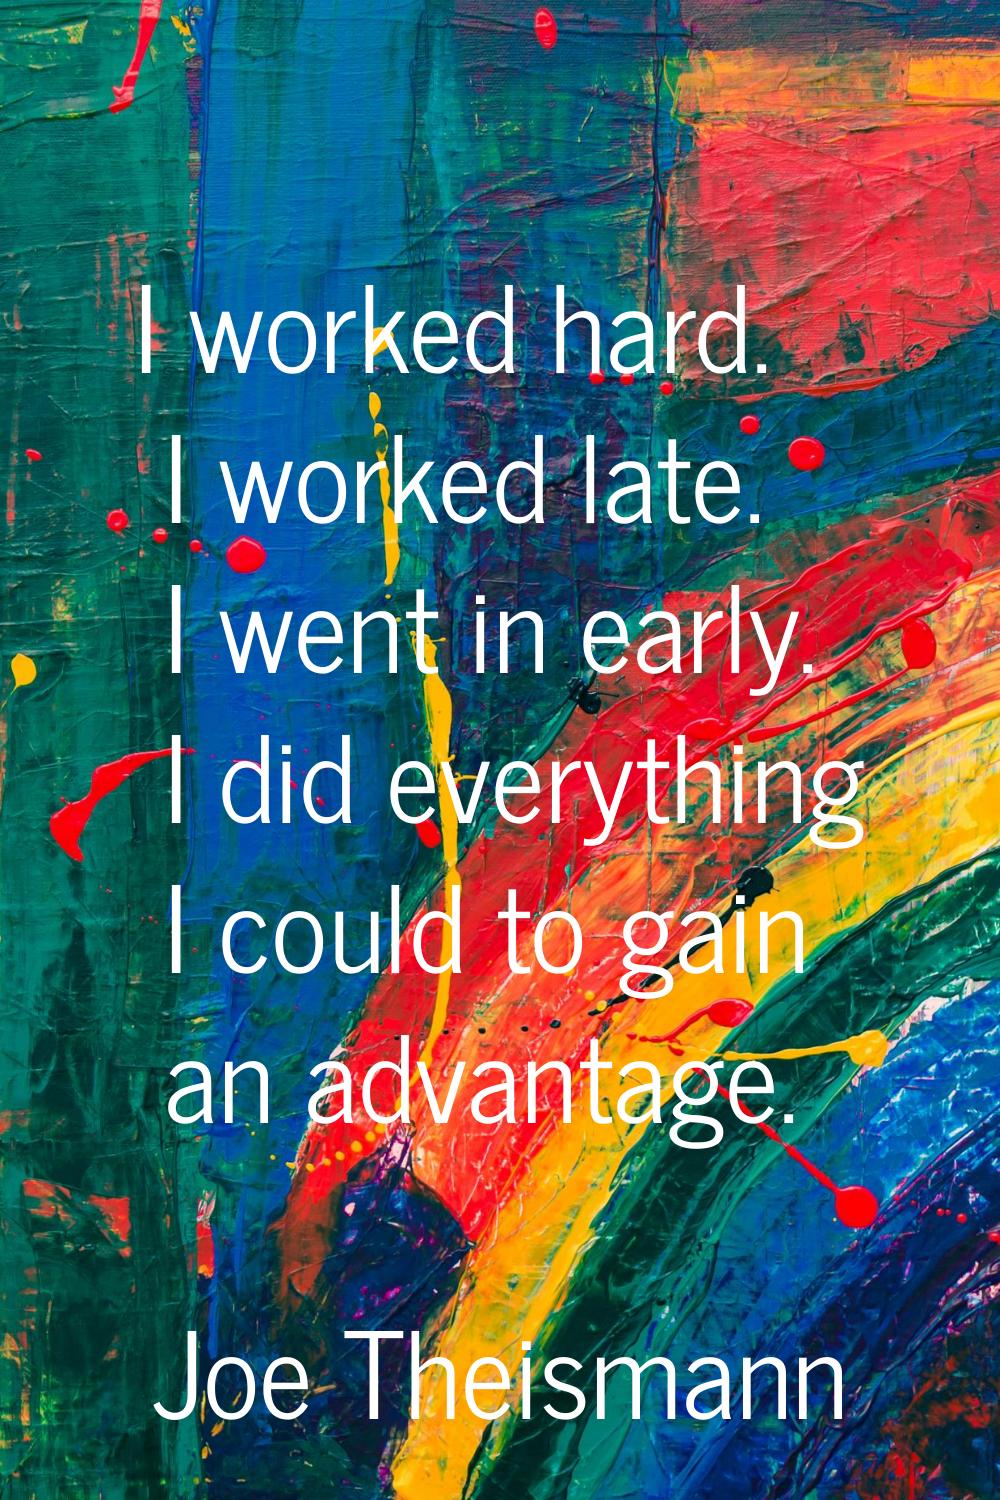 I worked hard. I worked late. I went in early. I did everything I could to gain an advantage.